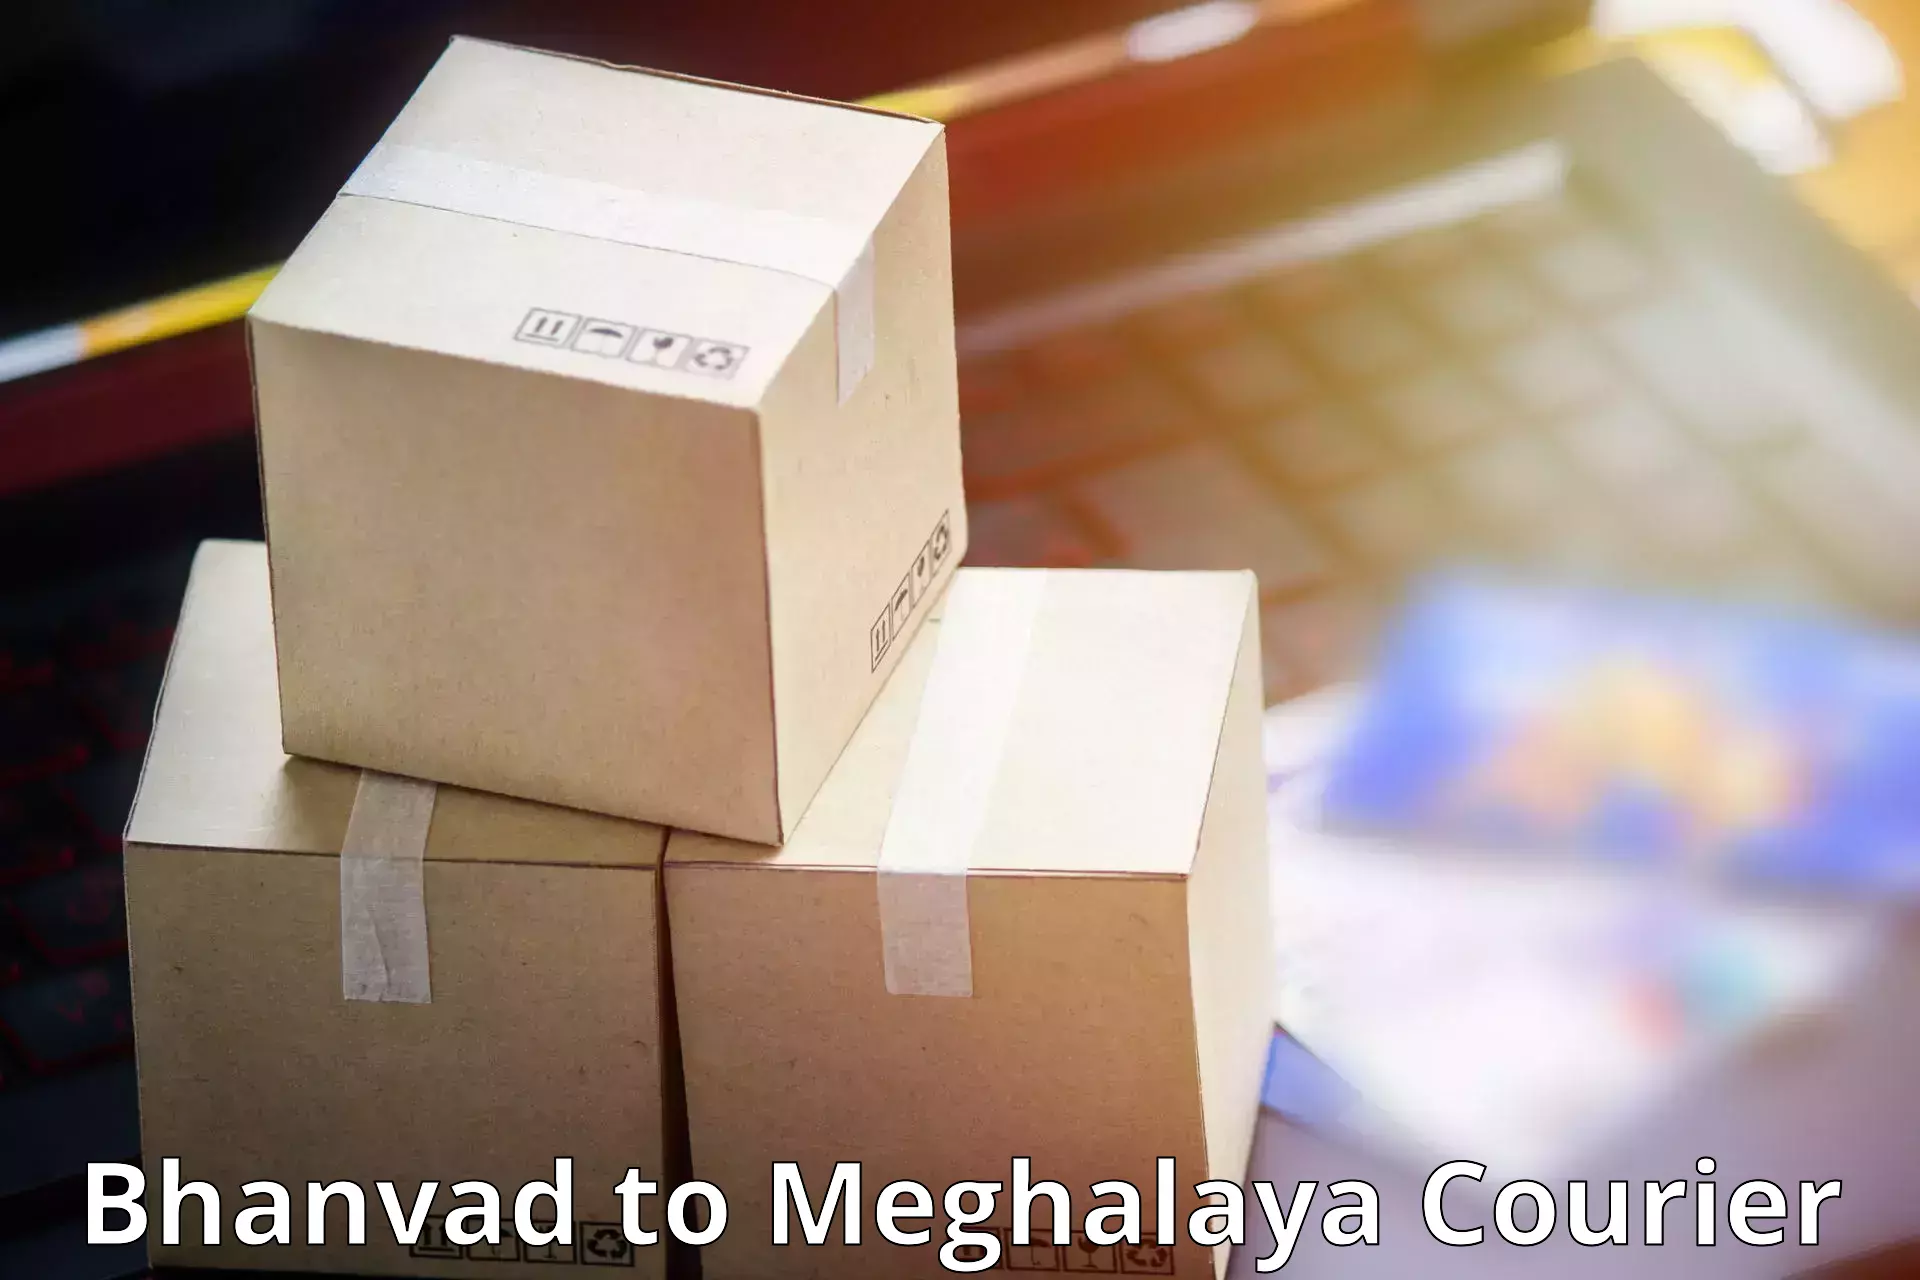 Advanced shipping technology in Bhanvad to Shillong